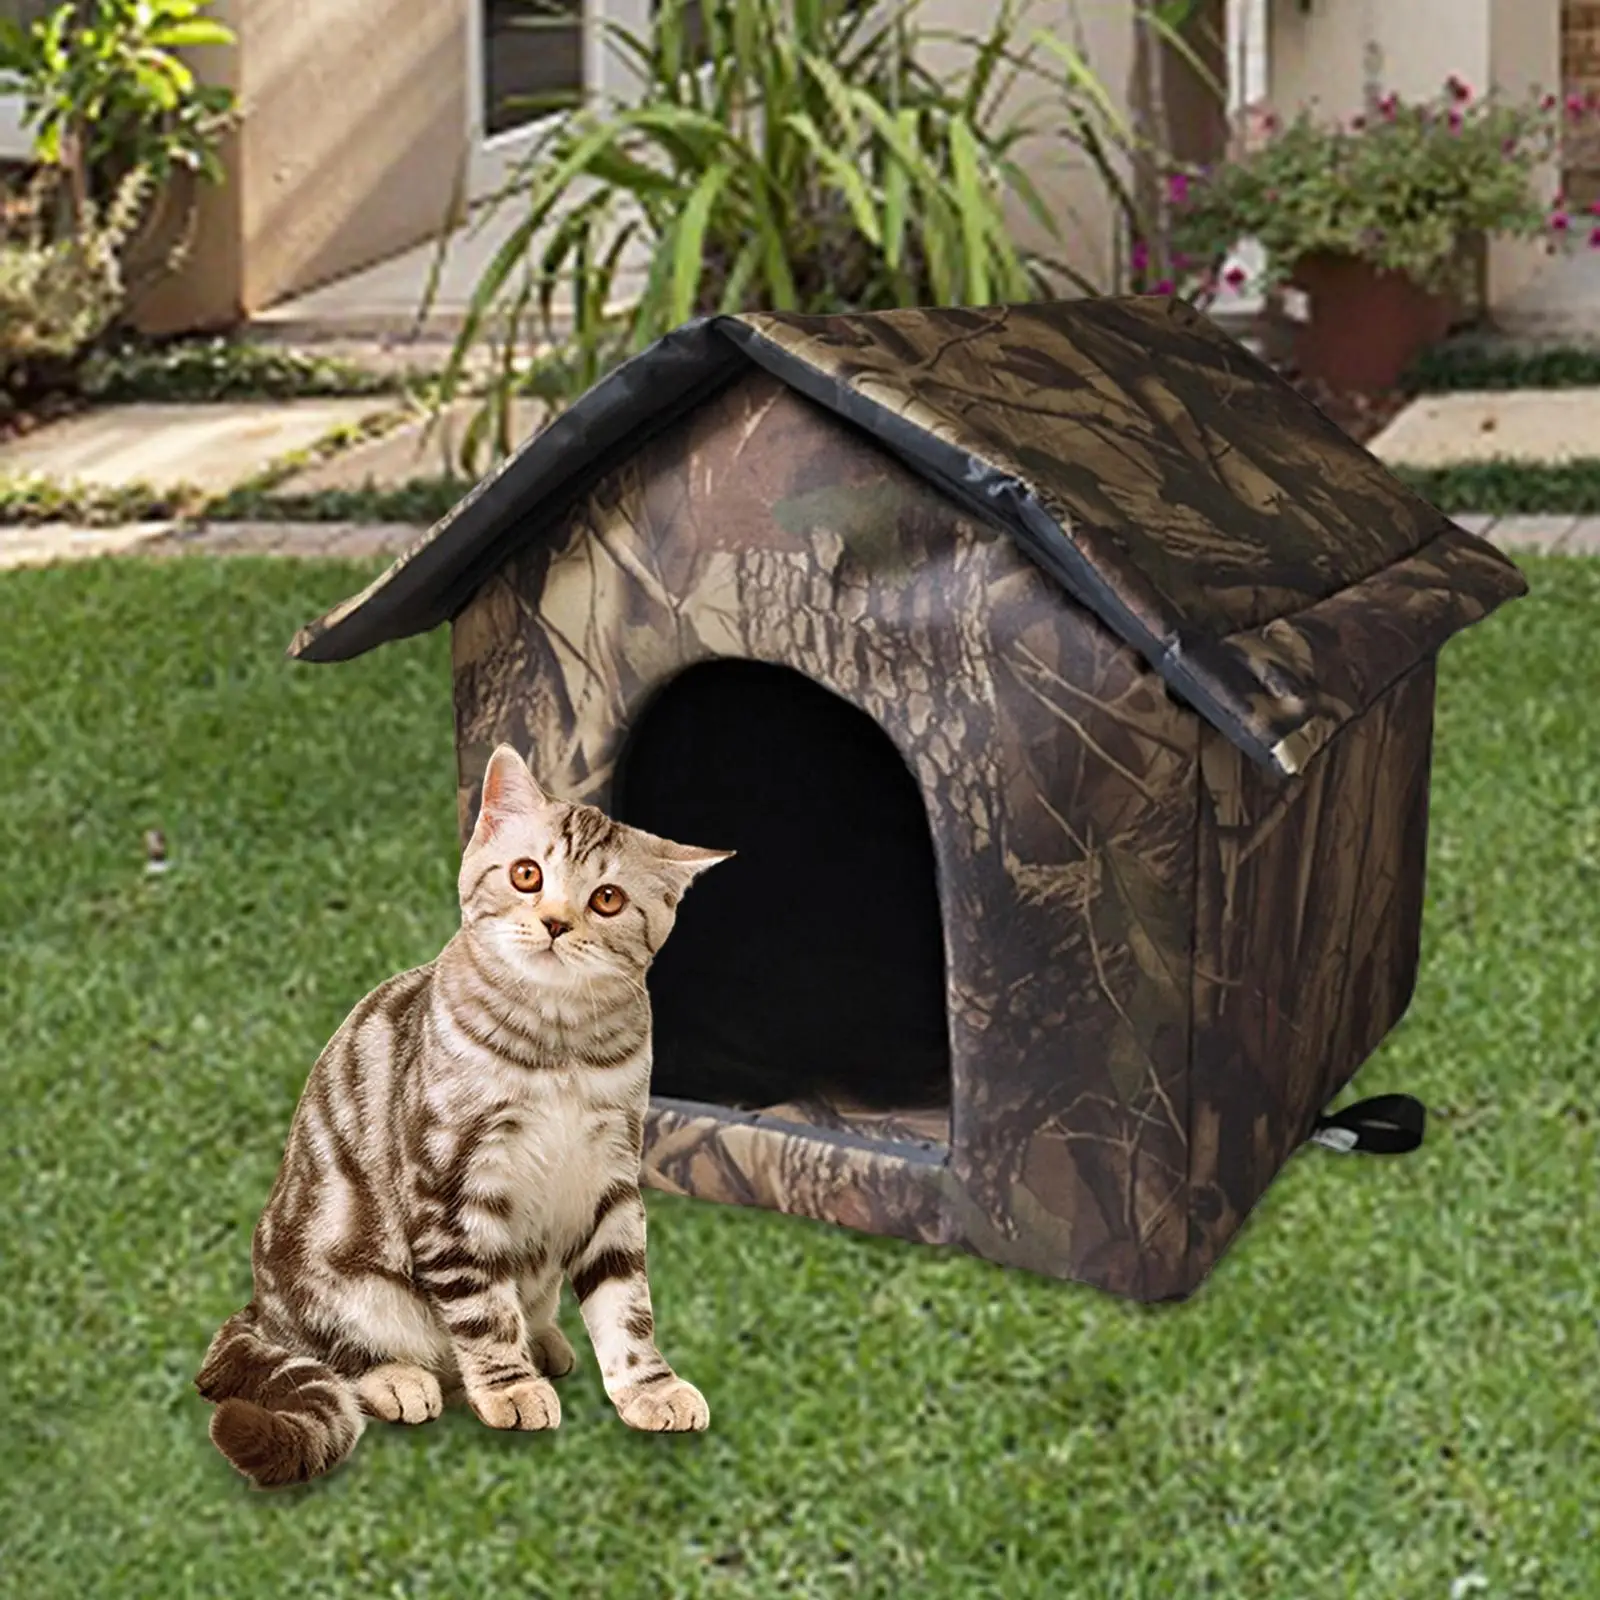 Cute Waterproof Kittens Cat Bed Pet Tent Cave for Garages, Porches, Barns, Balconies, Corridors with Sponge Lining Weatherproof